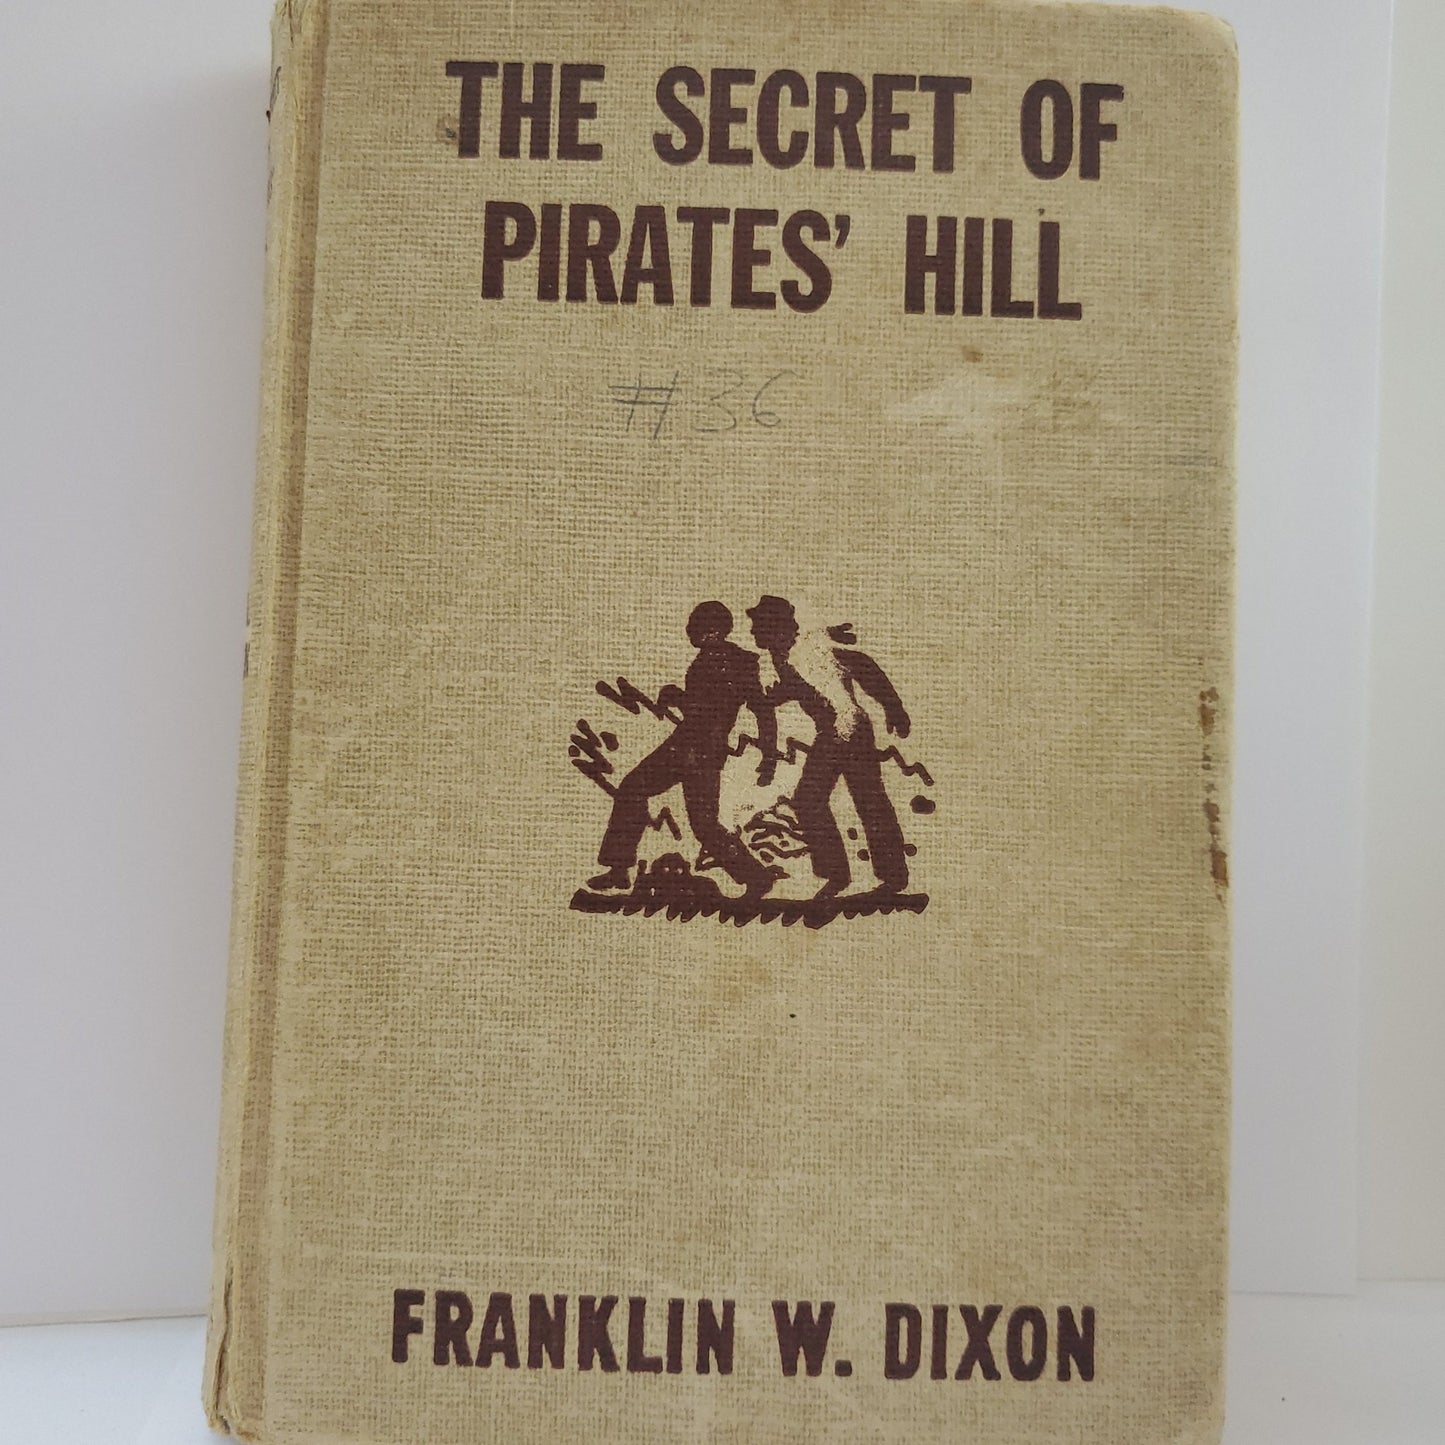 The Secret of Pirates' Hill - [ash-ling] Booksellers